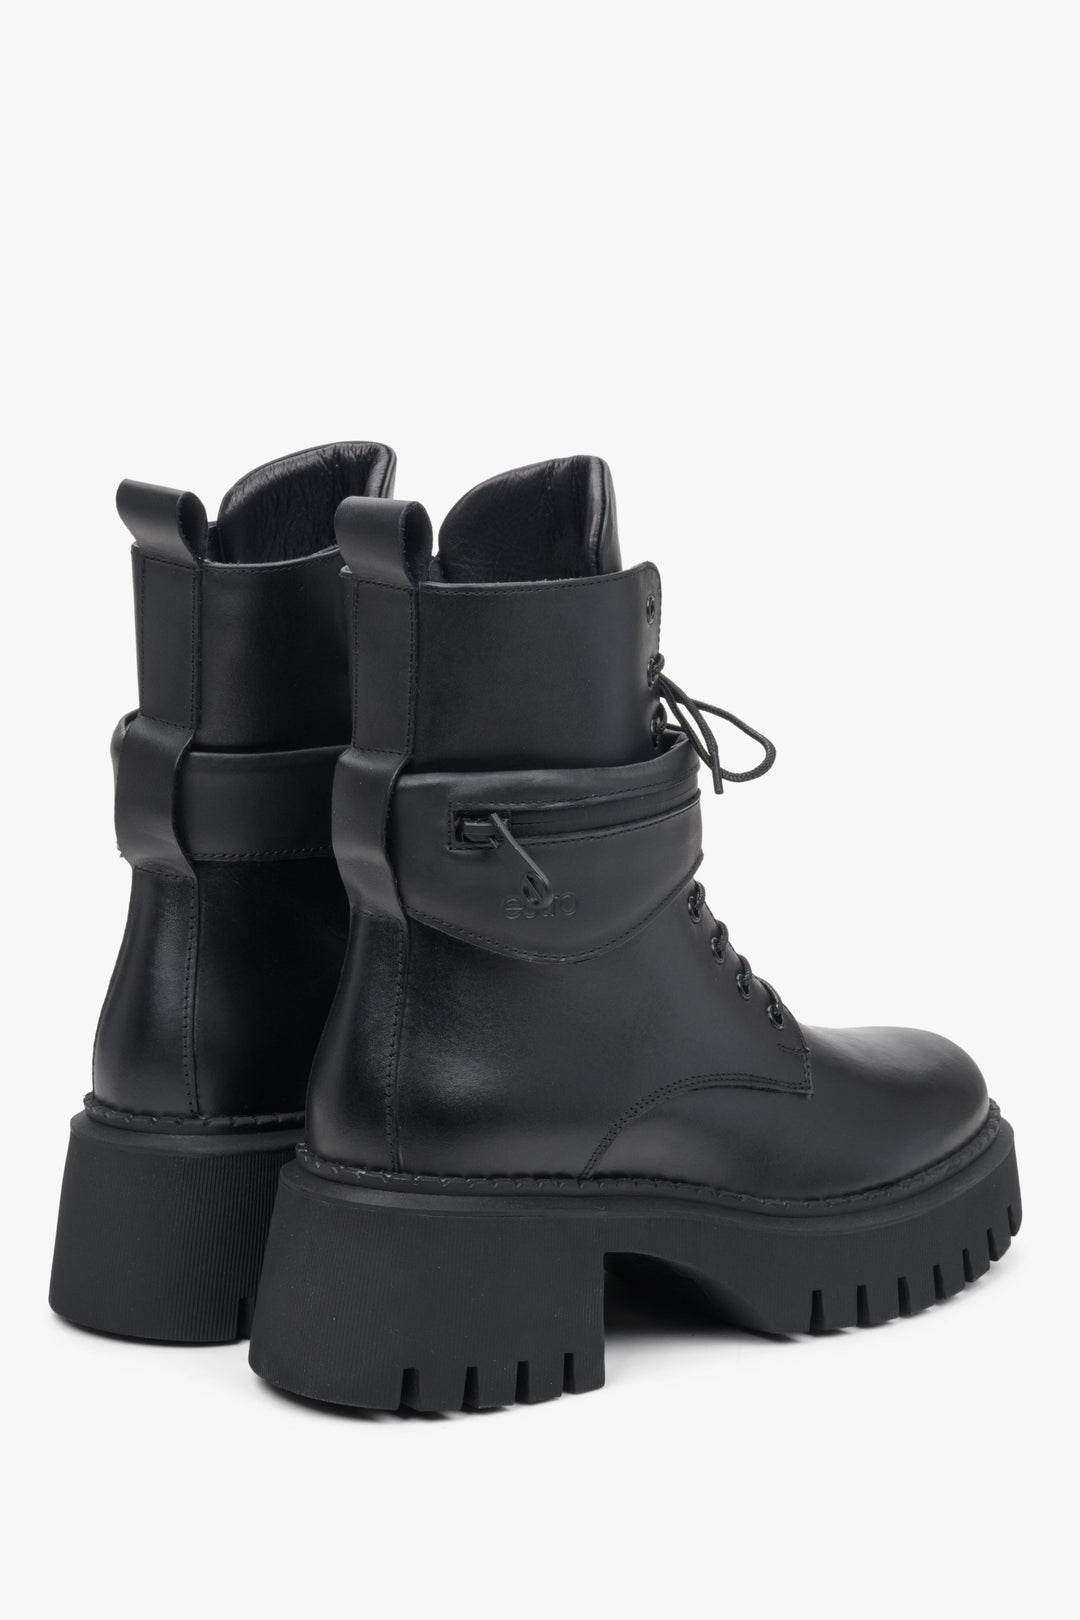 Women's black leather winter boots - close-up on the side and back of the shaft.